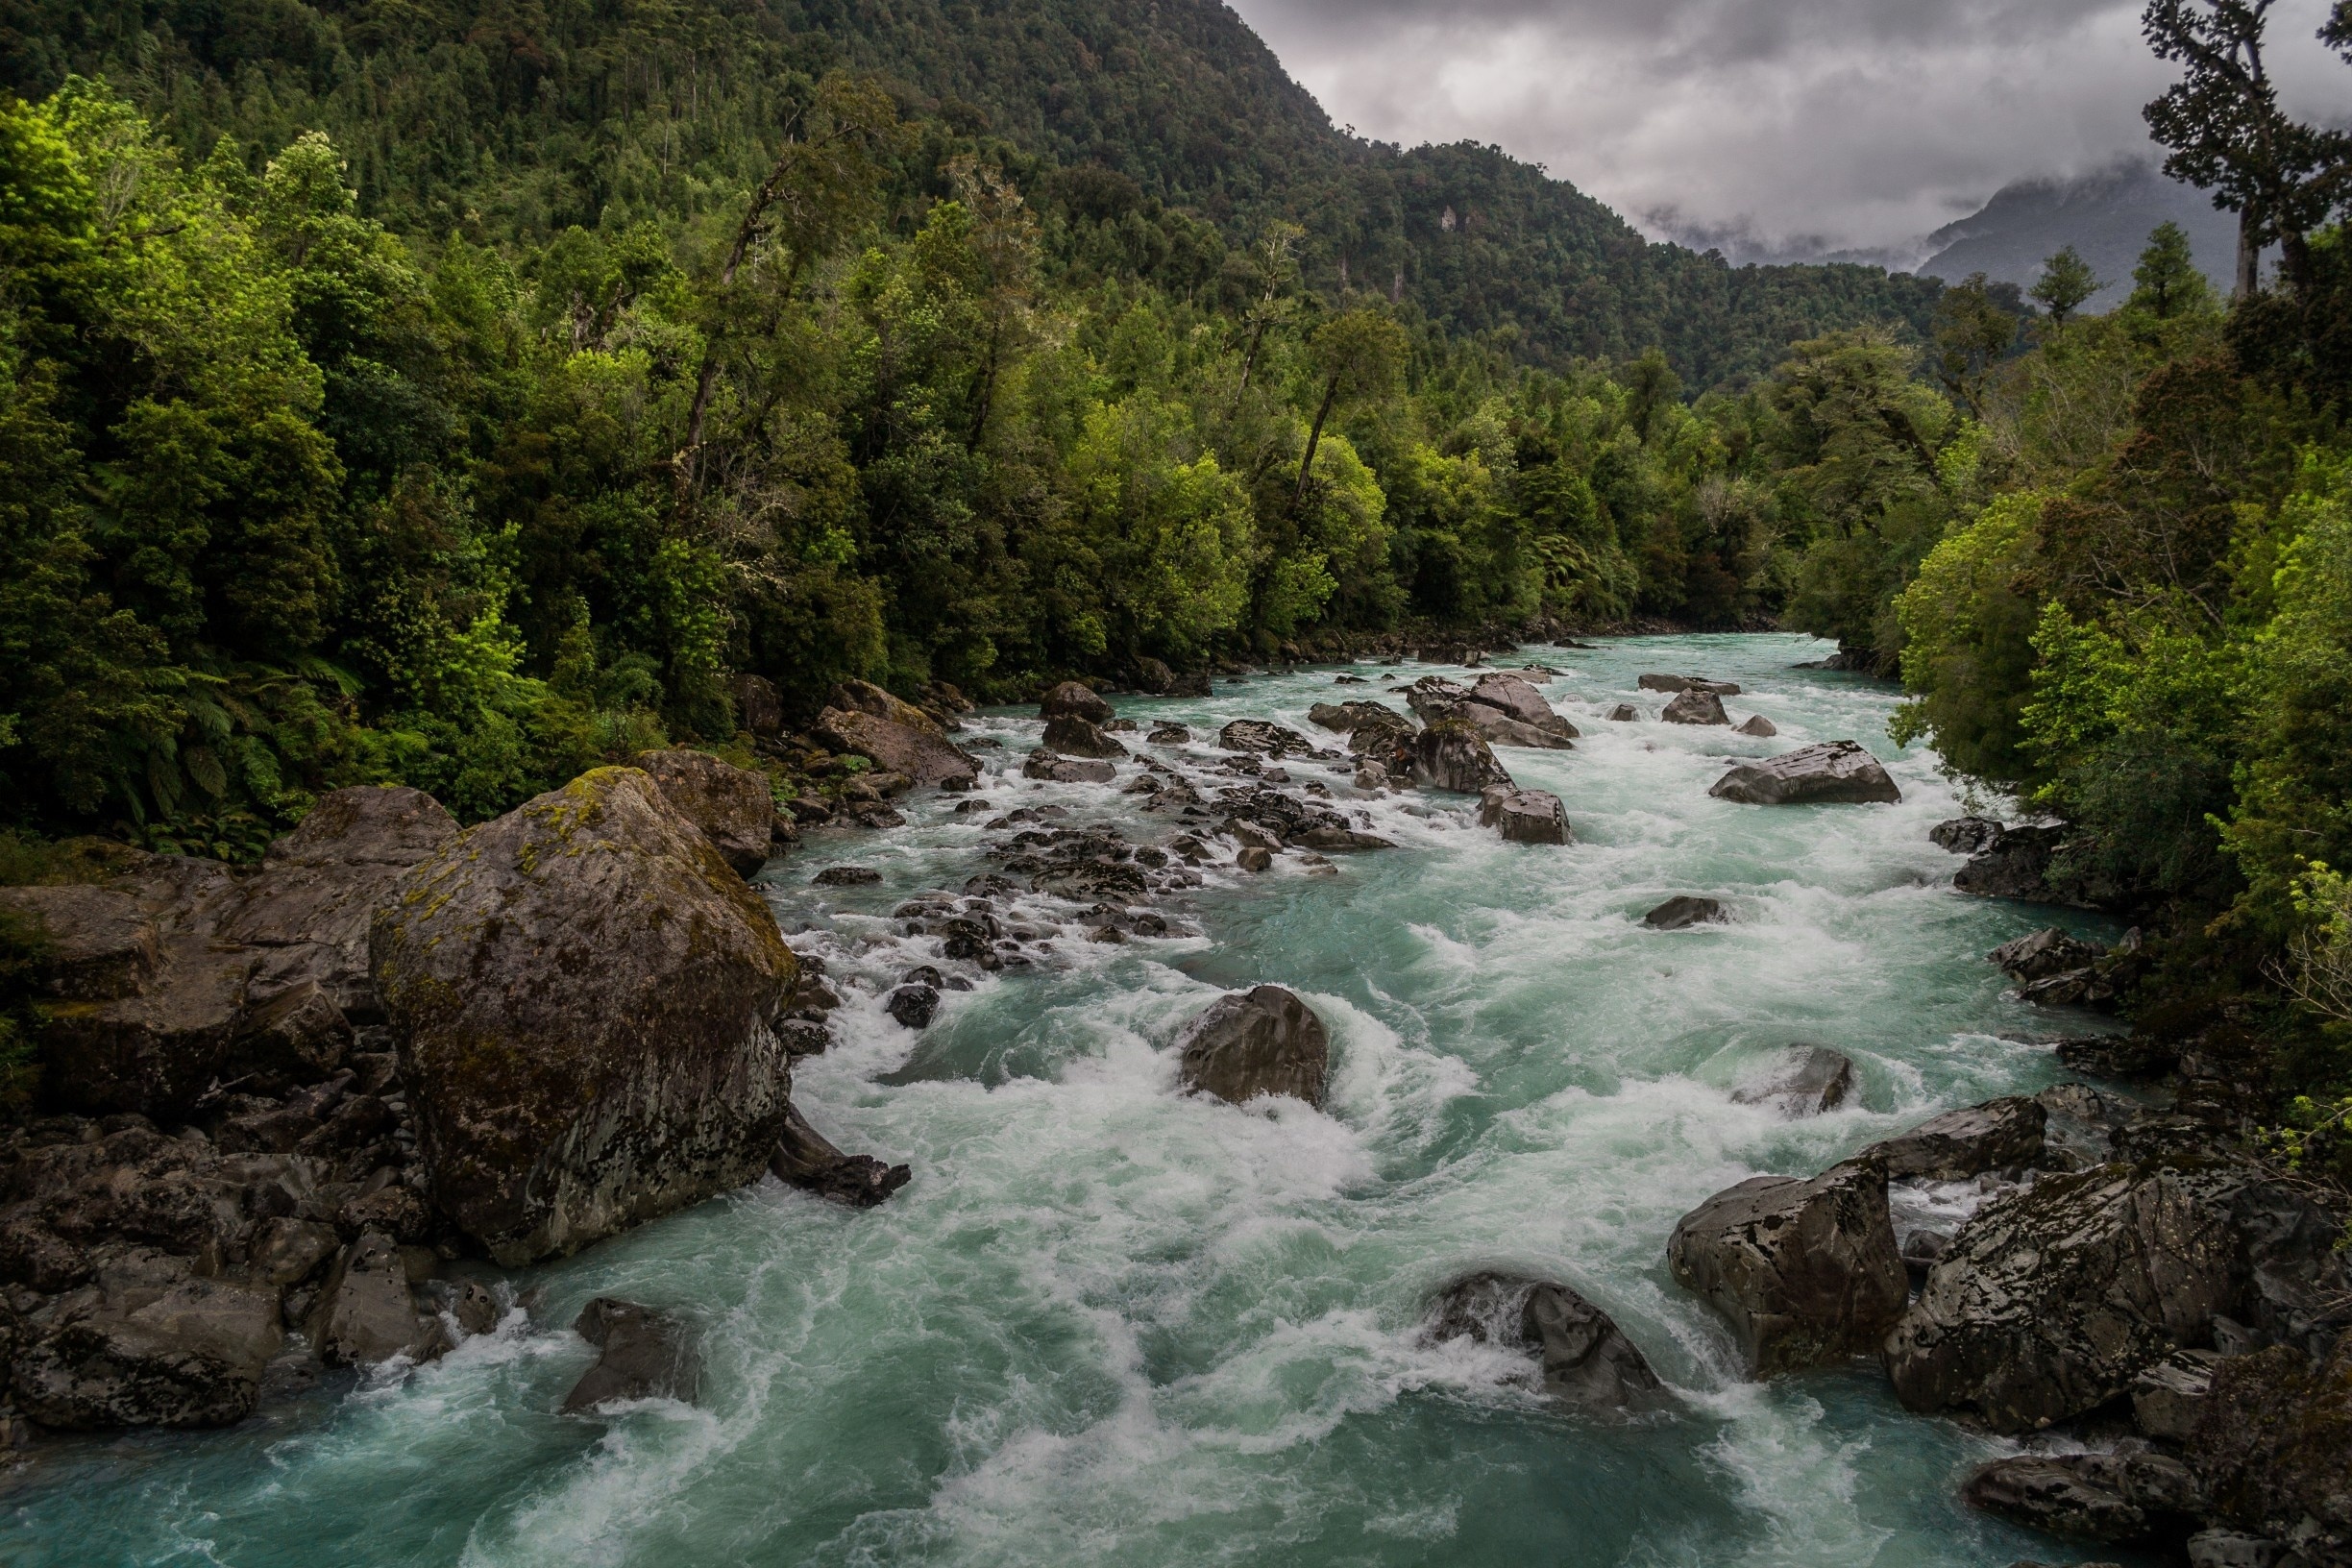 On the way of the Carretera Austral, a must stopover is in this tiny city of Hornopiren. This is where you have to take the ferry, but before do the hike to Hornopiren National Park and enjoy this incredible view of Blanco river.

#bvspatagonia
#Hornopiren #Patagonia #Carreteraaustral